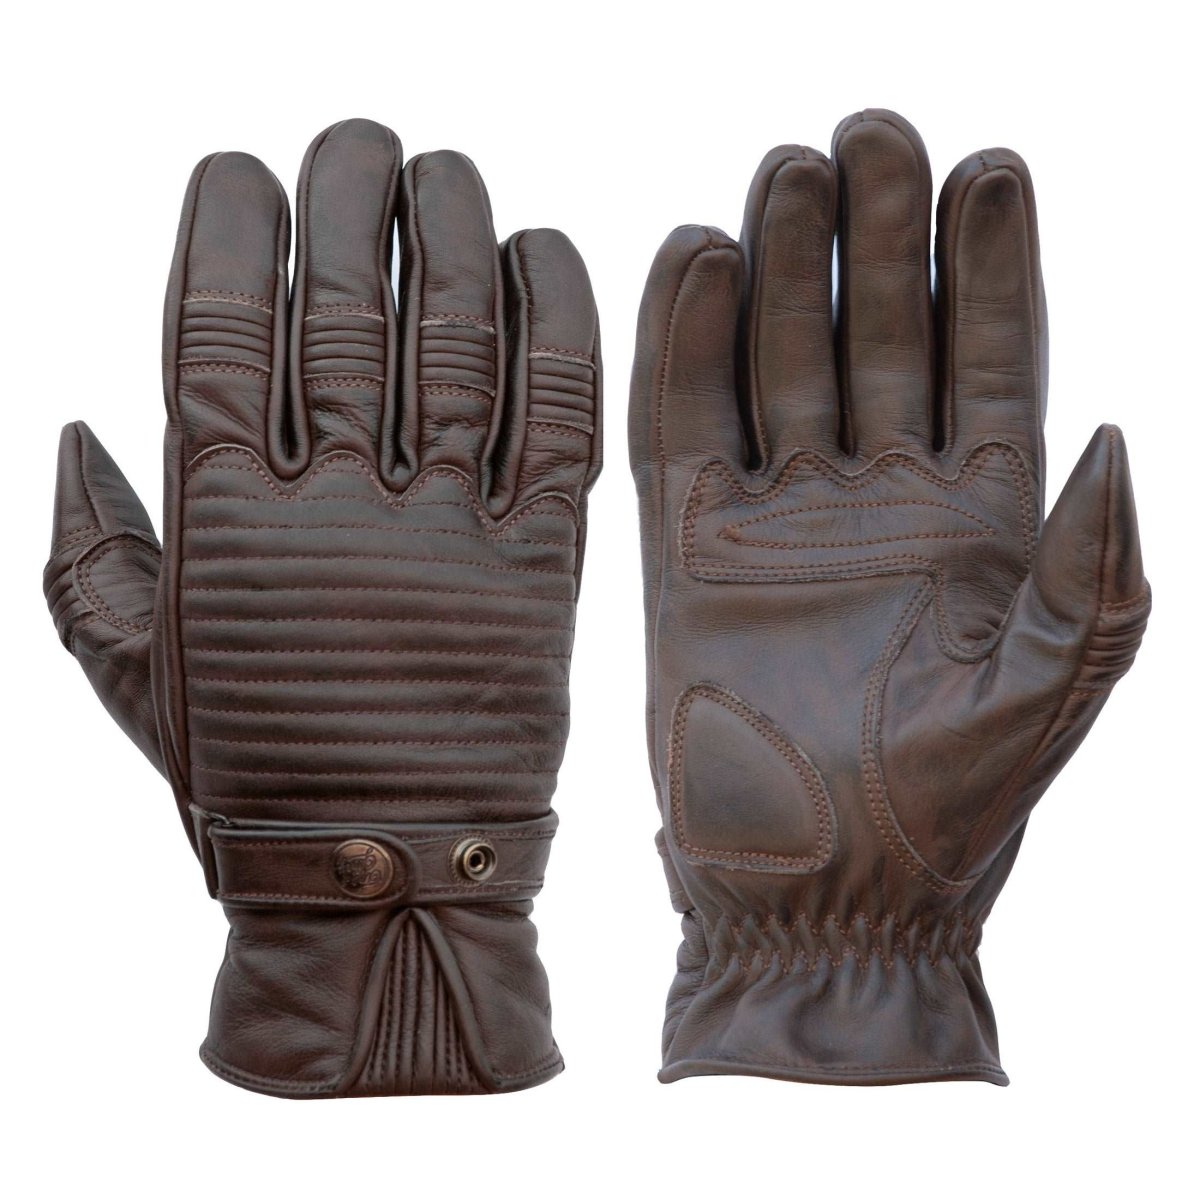 Age of Glory Garage Leather CE Gloves in Brown